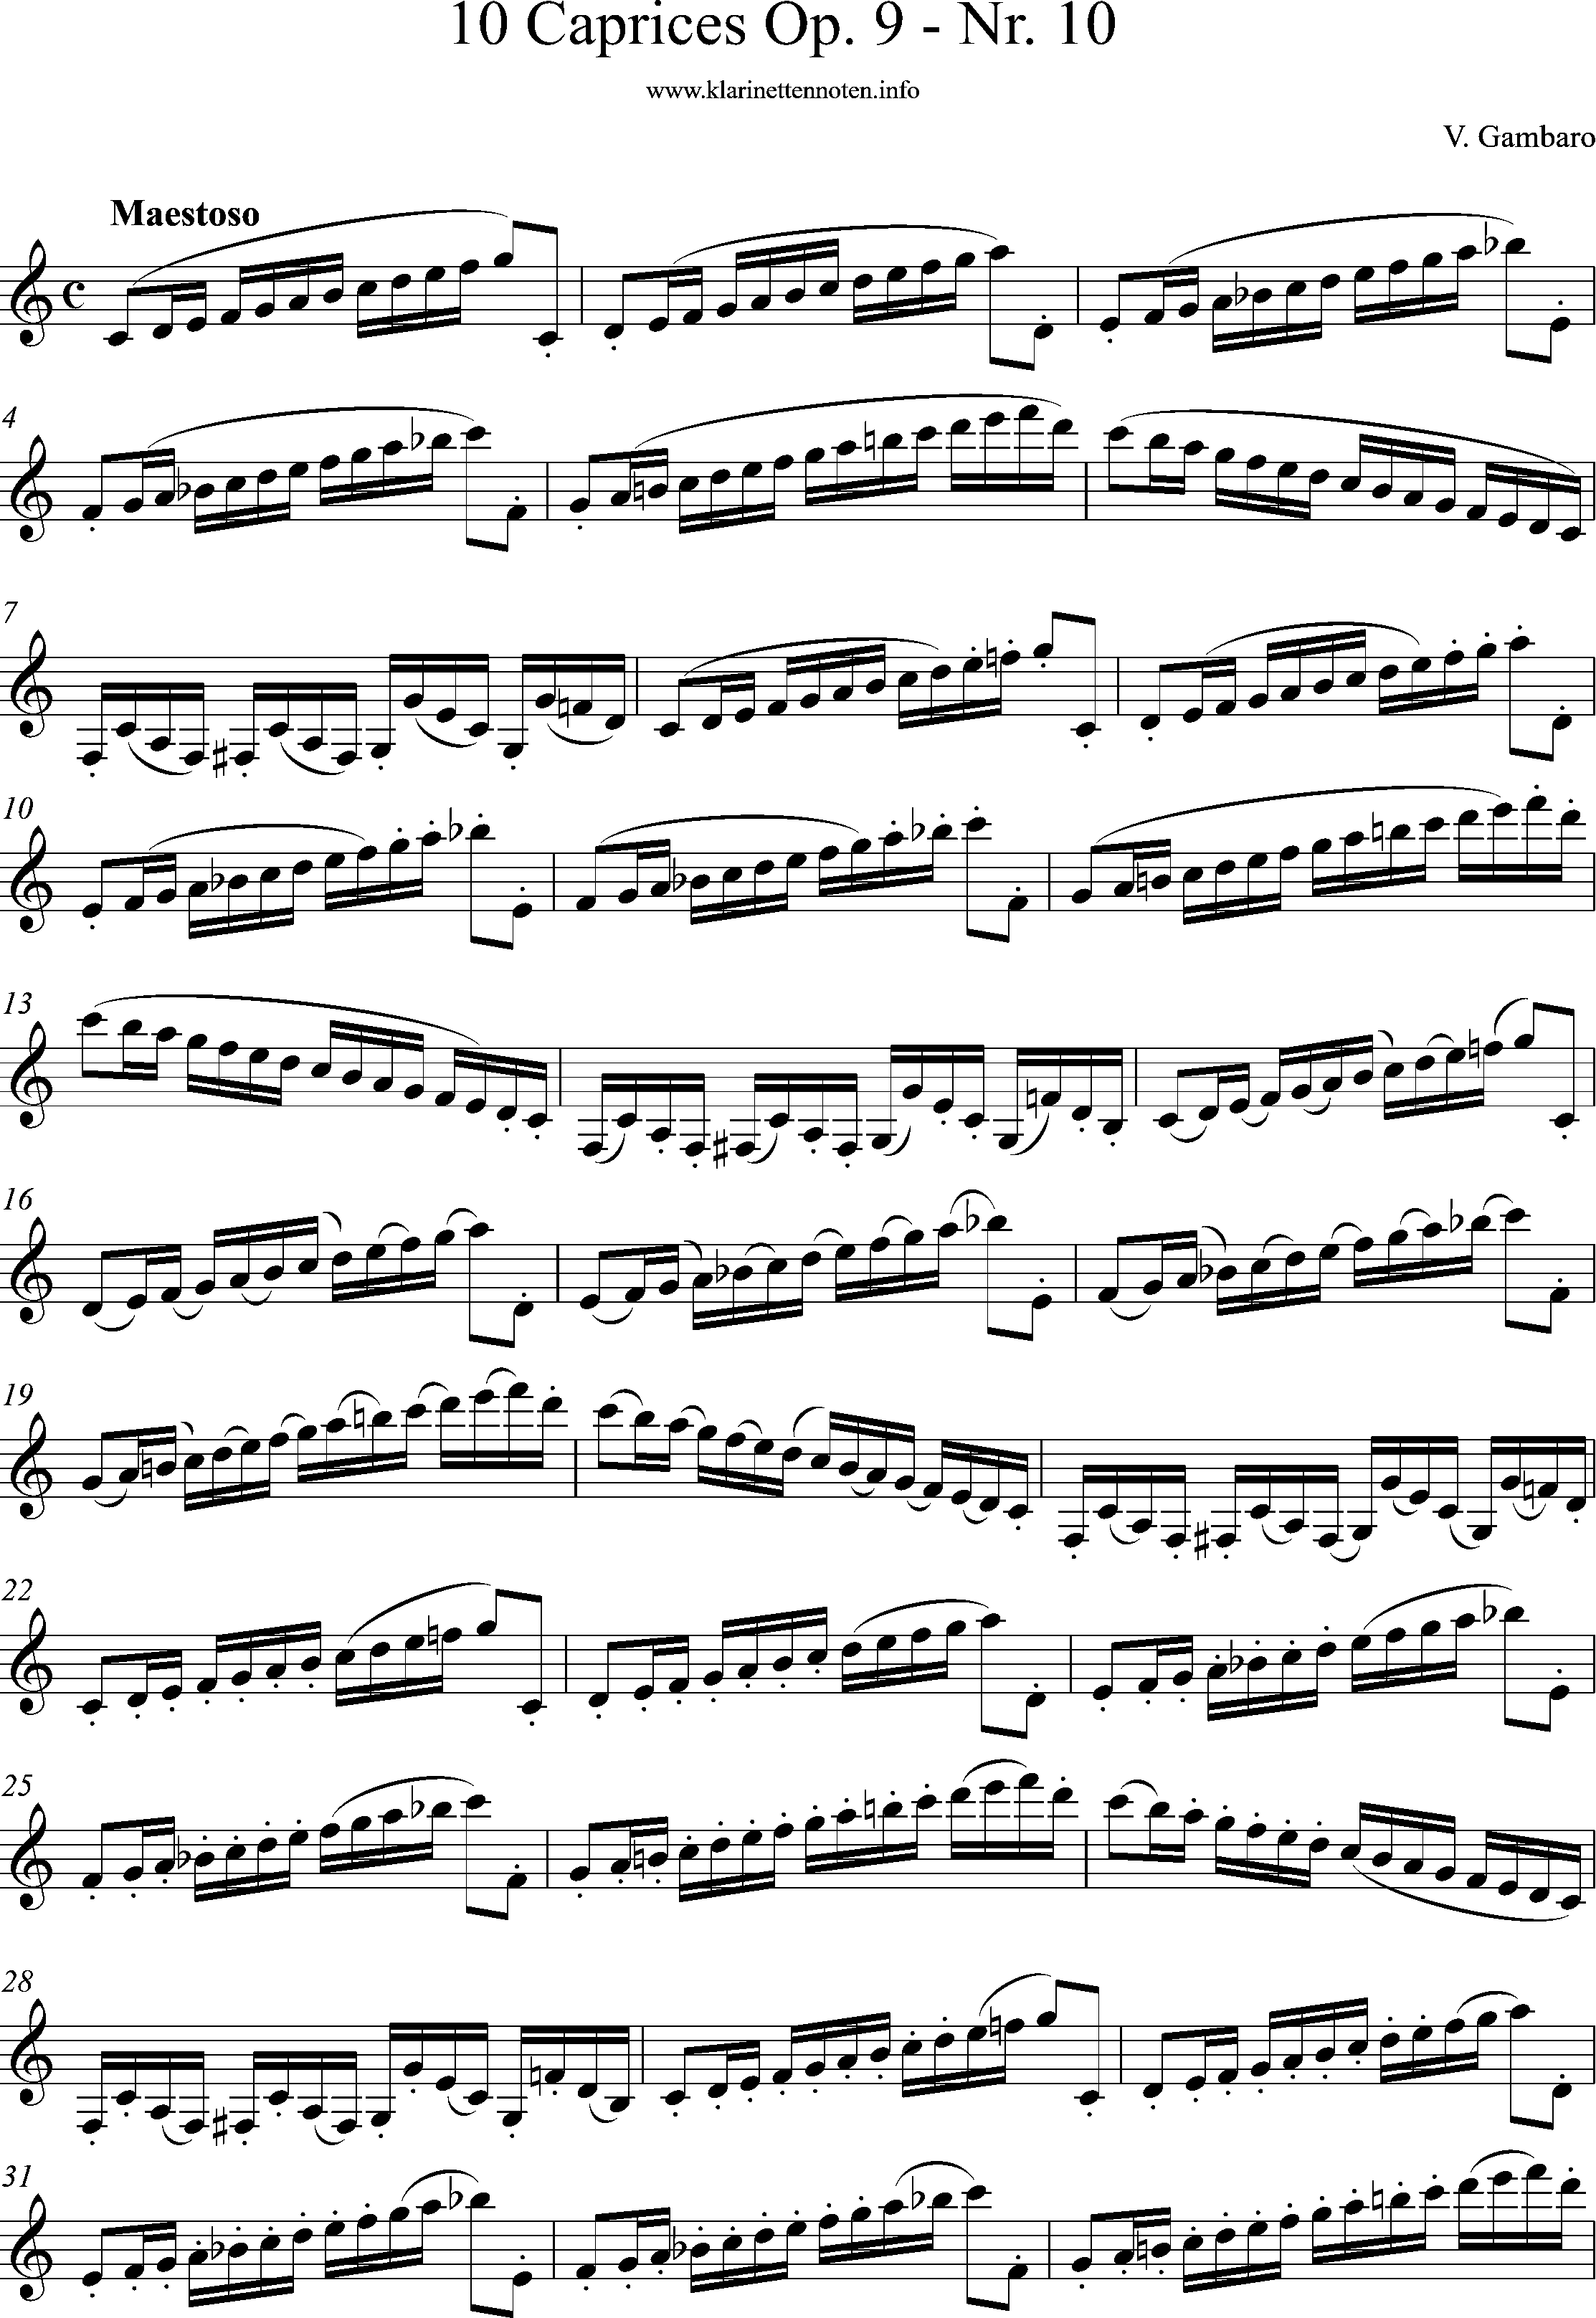 10 Caprices op. 9, Nr-10, page 1